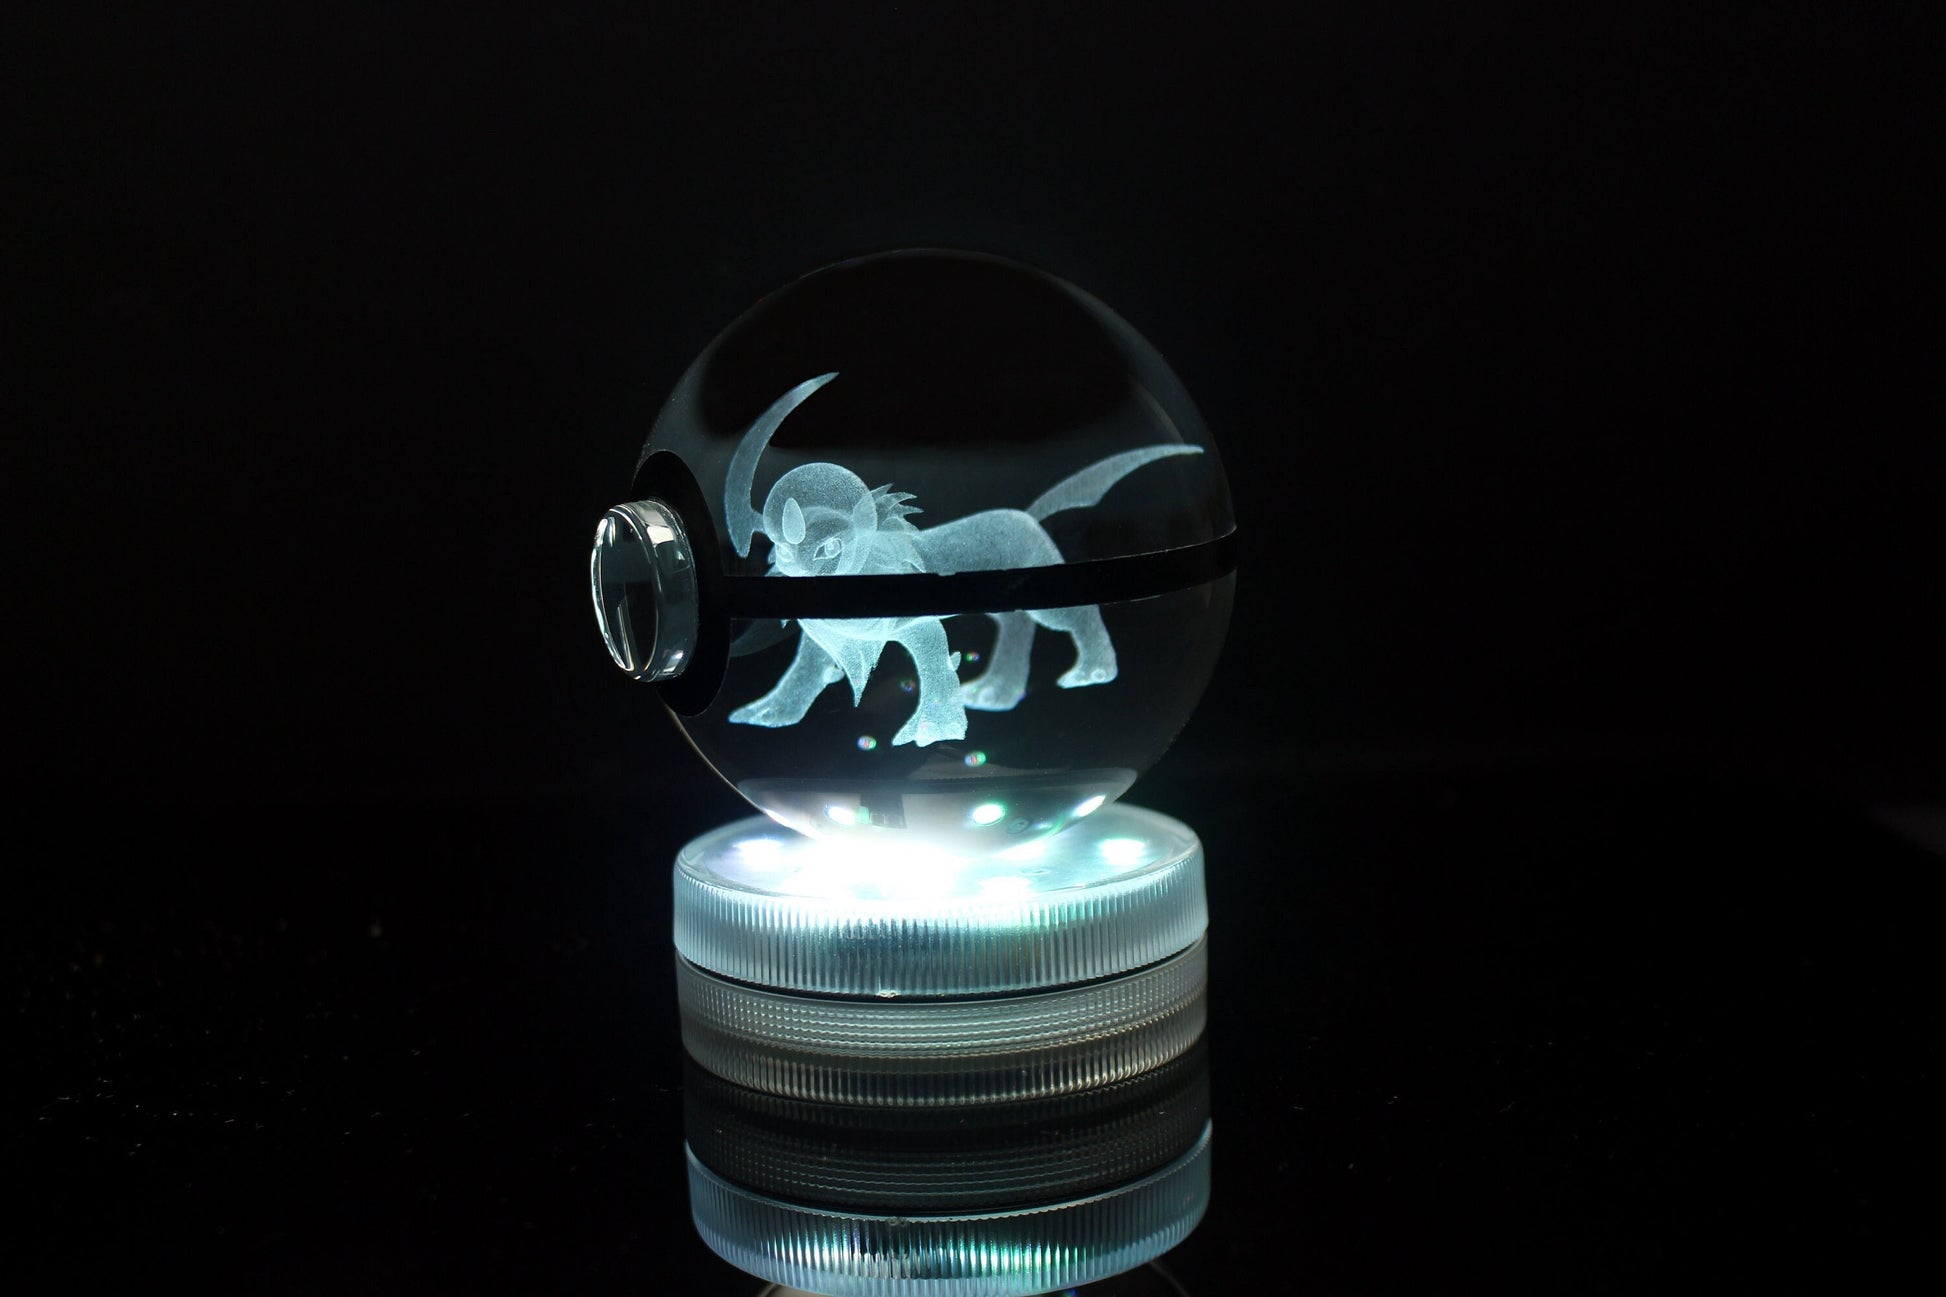 Absol Crystal Pokeball on our Remote controlled LED base.